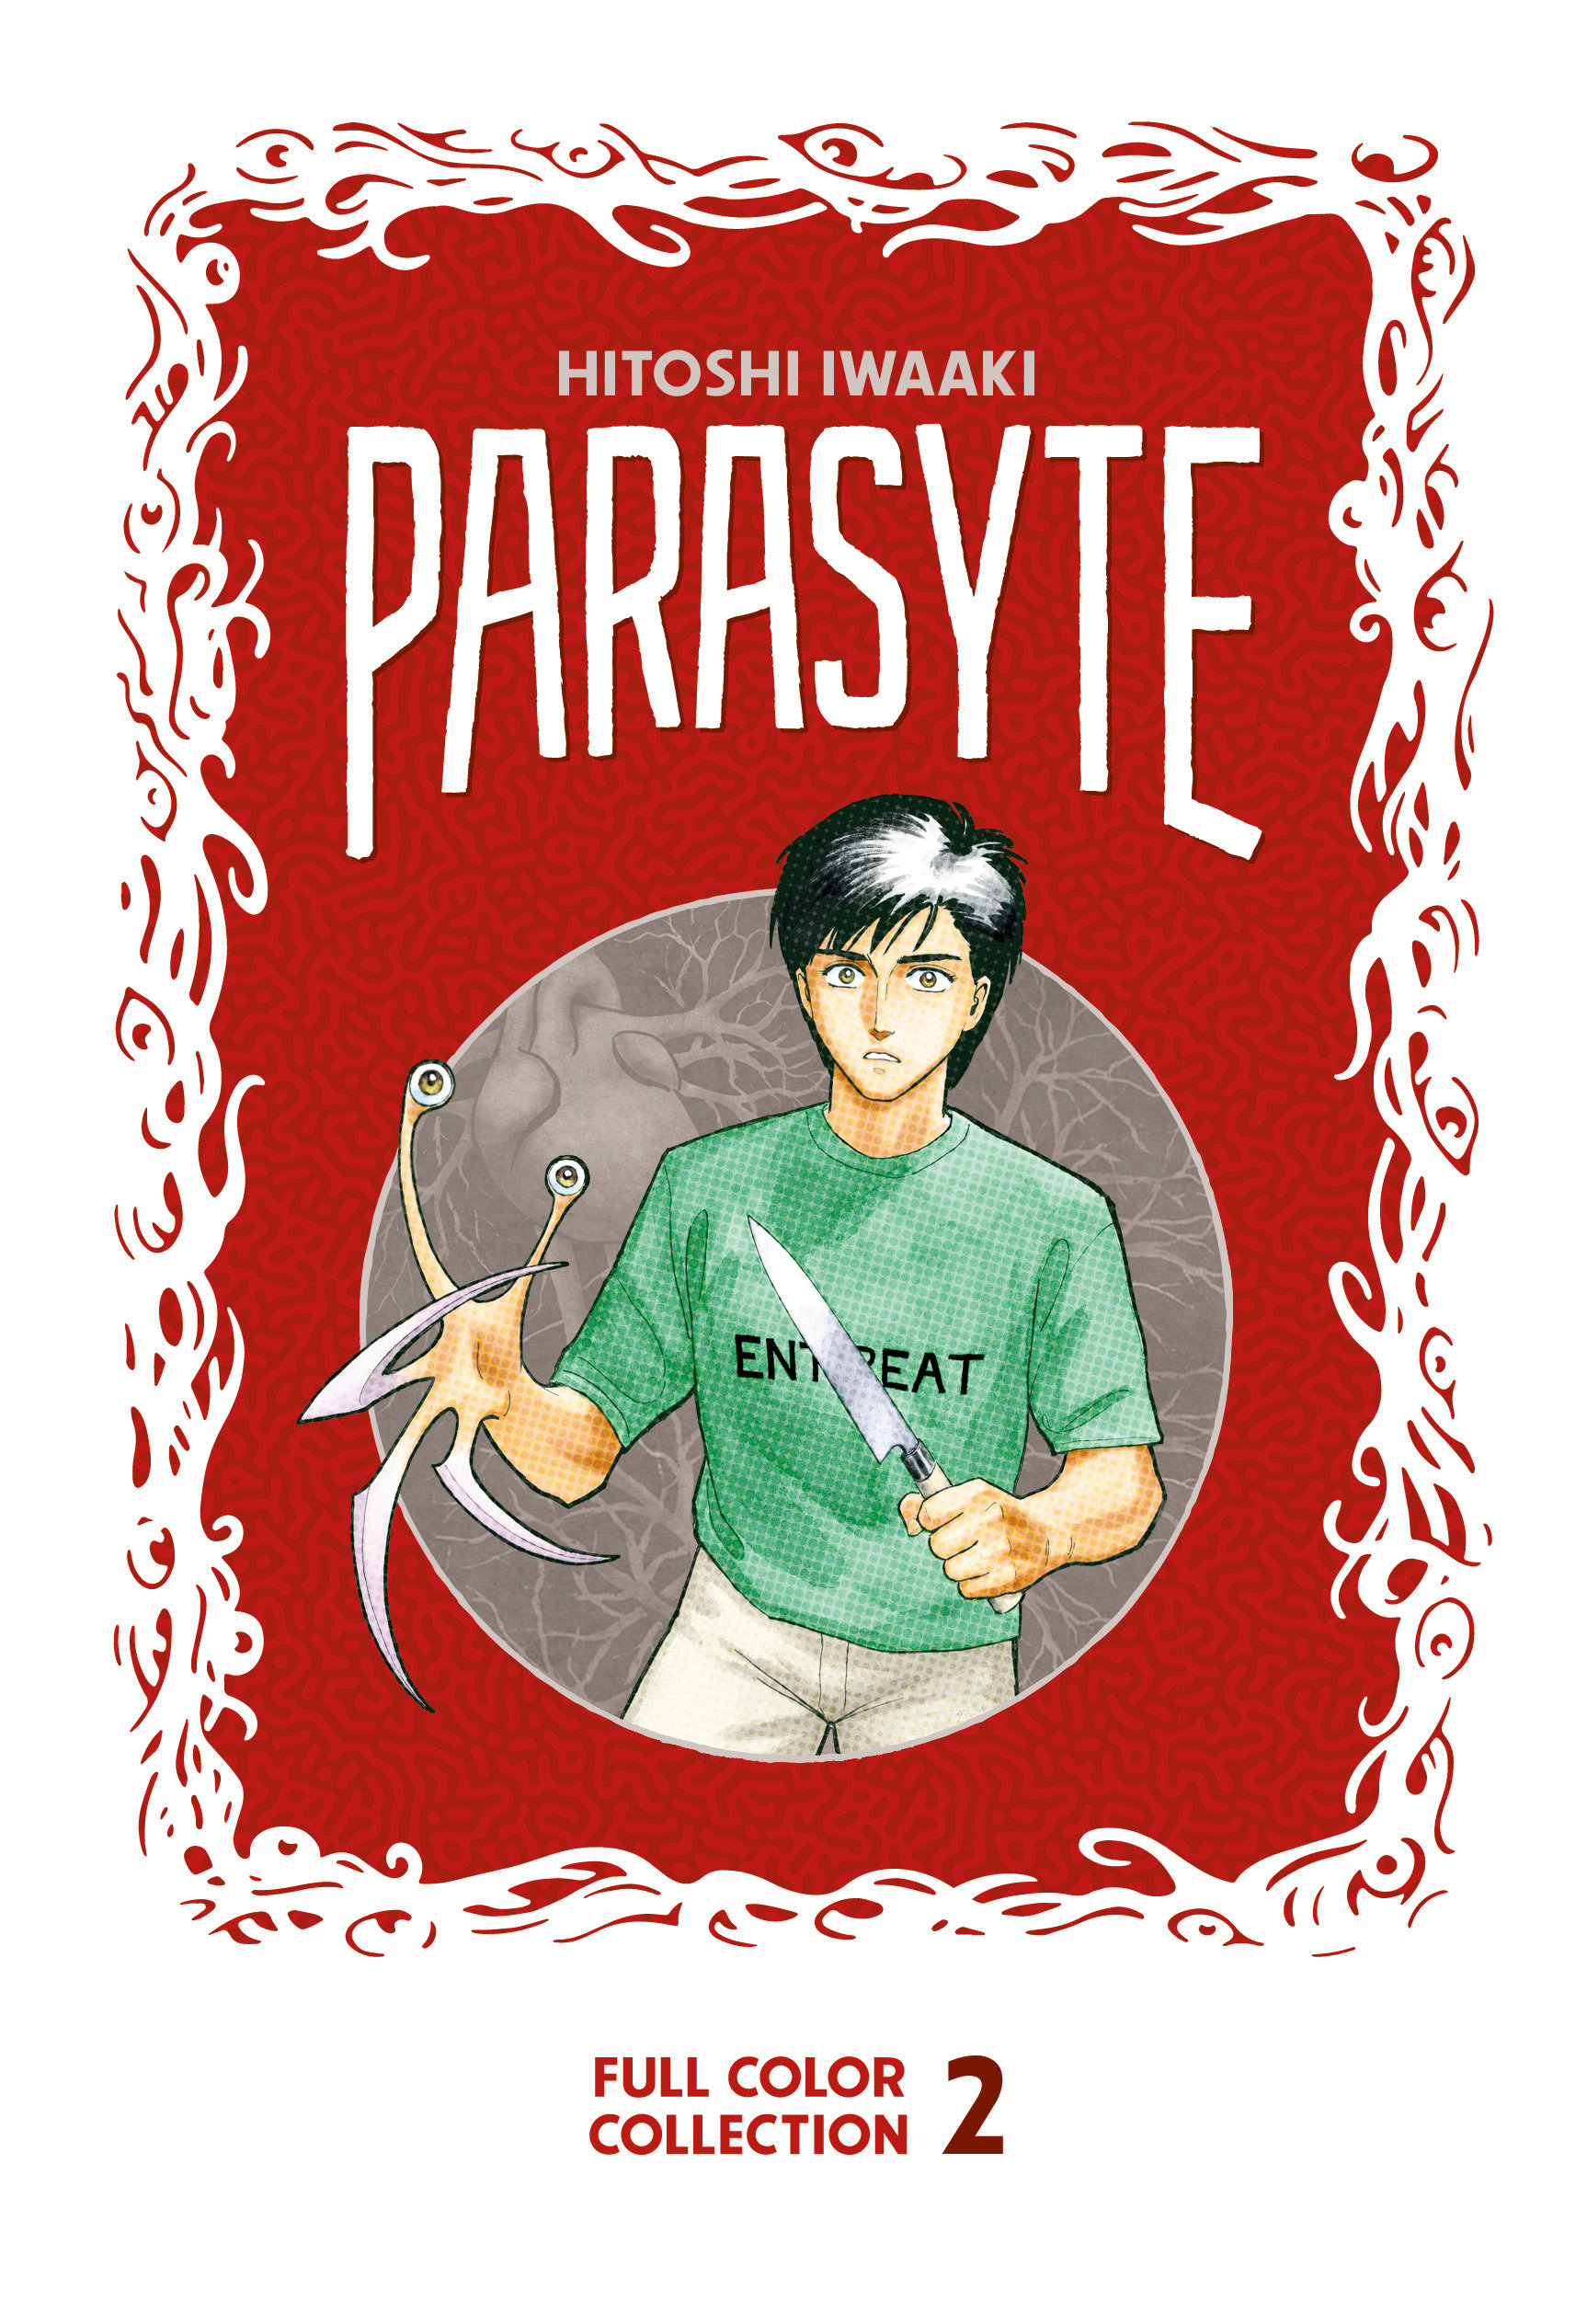 Parasyte Full Color Collection Manga Hardcover 2 (Mature)